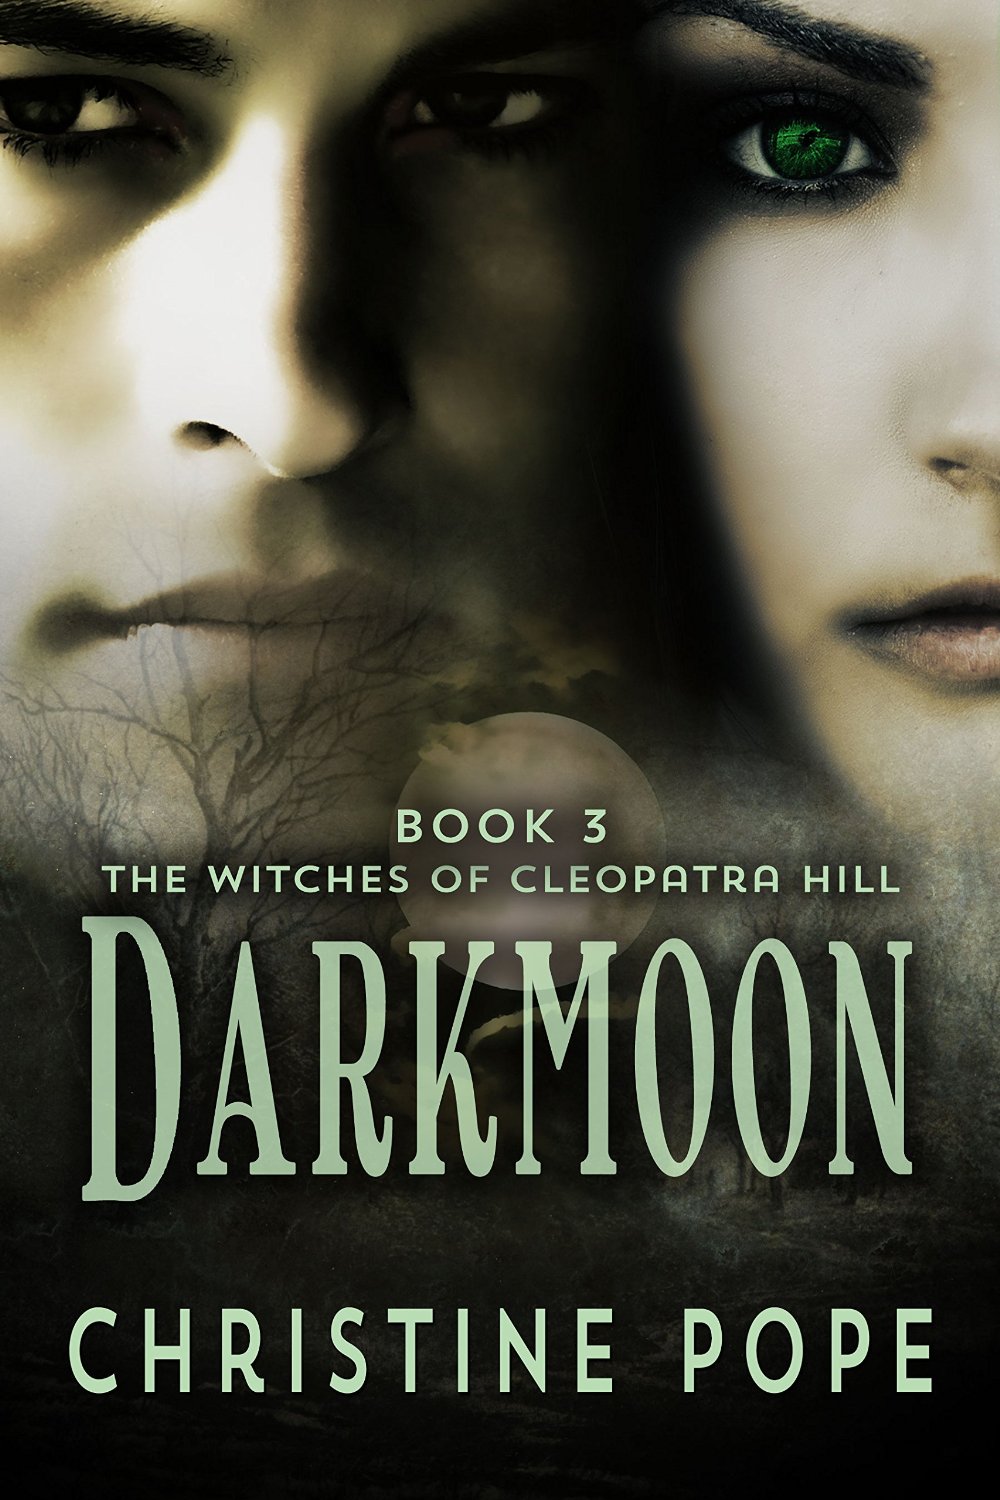 Darkmoon (The Witches of Cleopatra Hill Book 3)